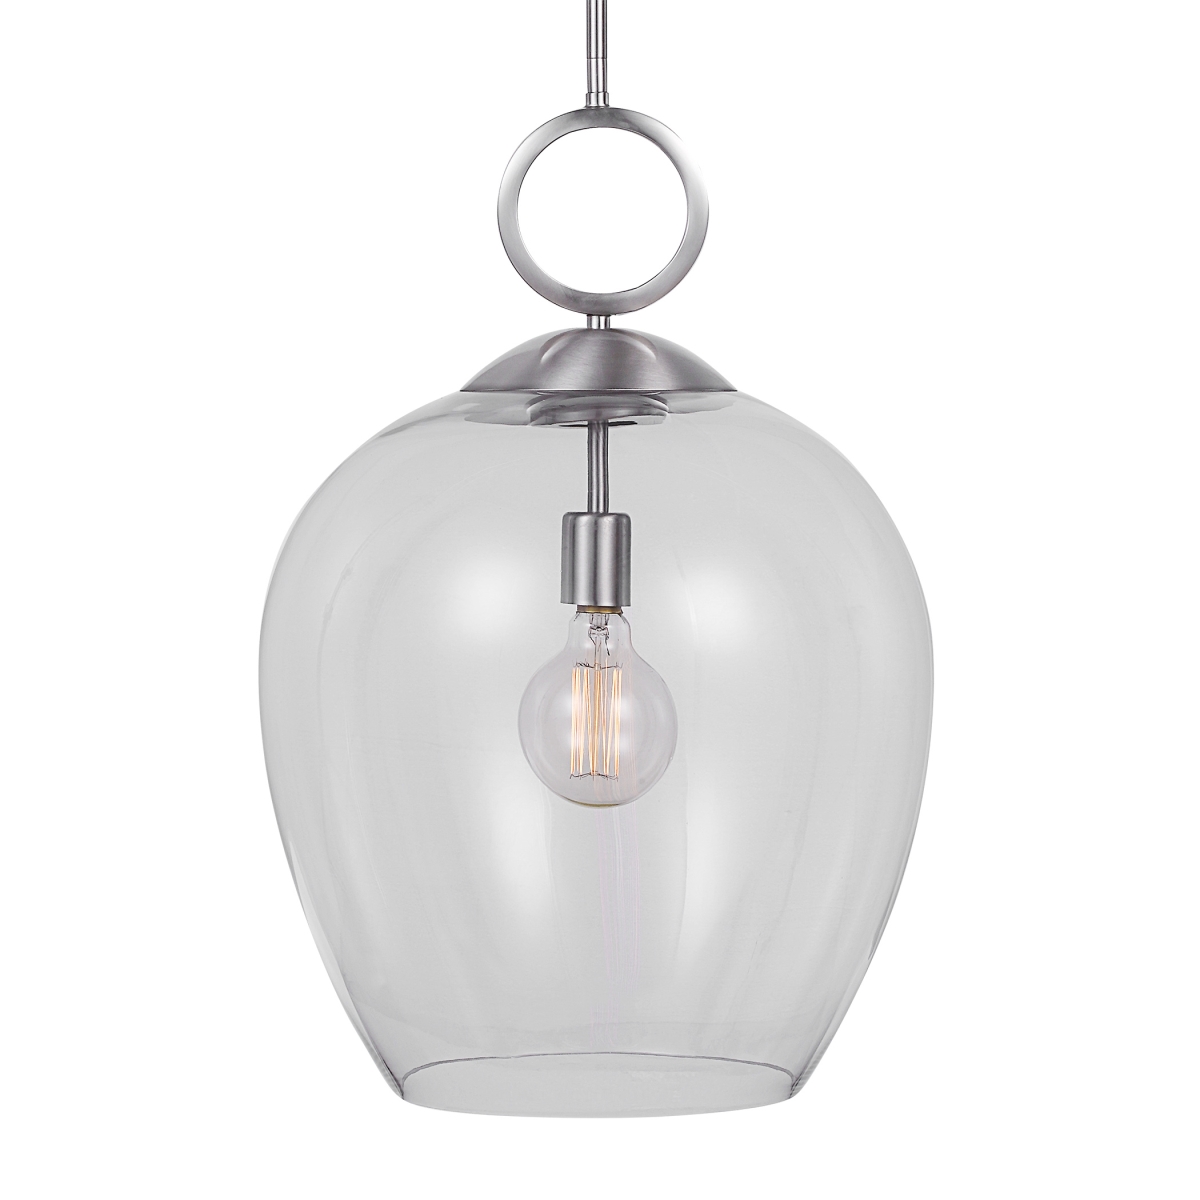 Picture of 212 Main 22169 Calix Nickel 1 Light Glass Pendant